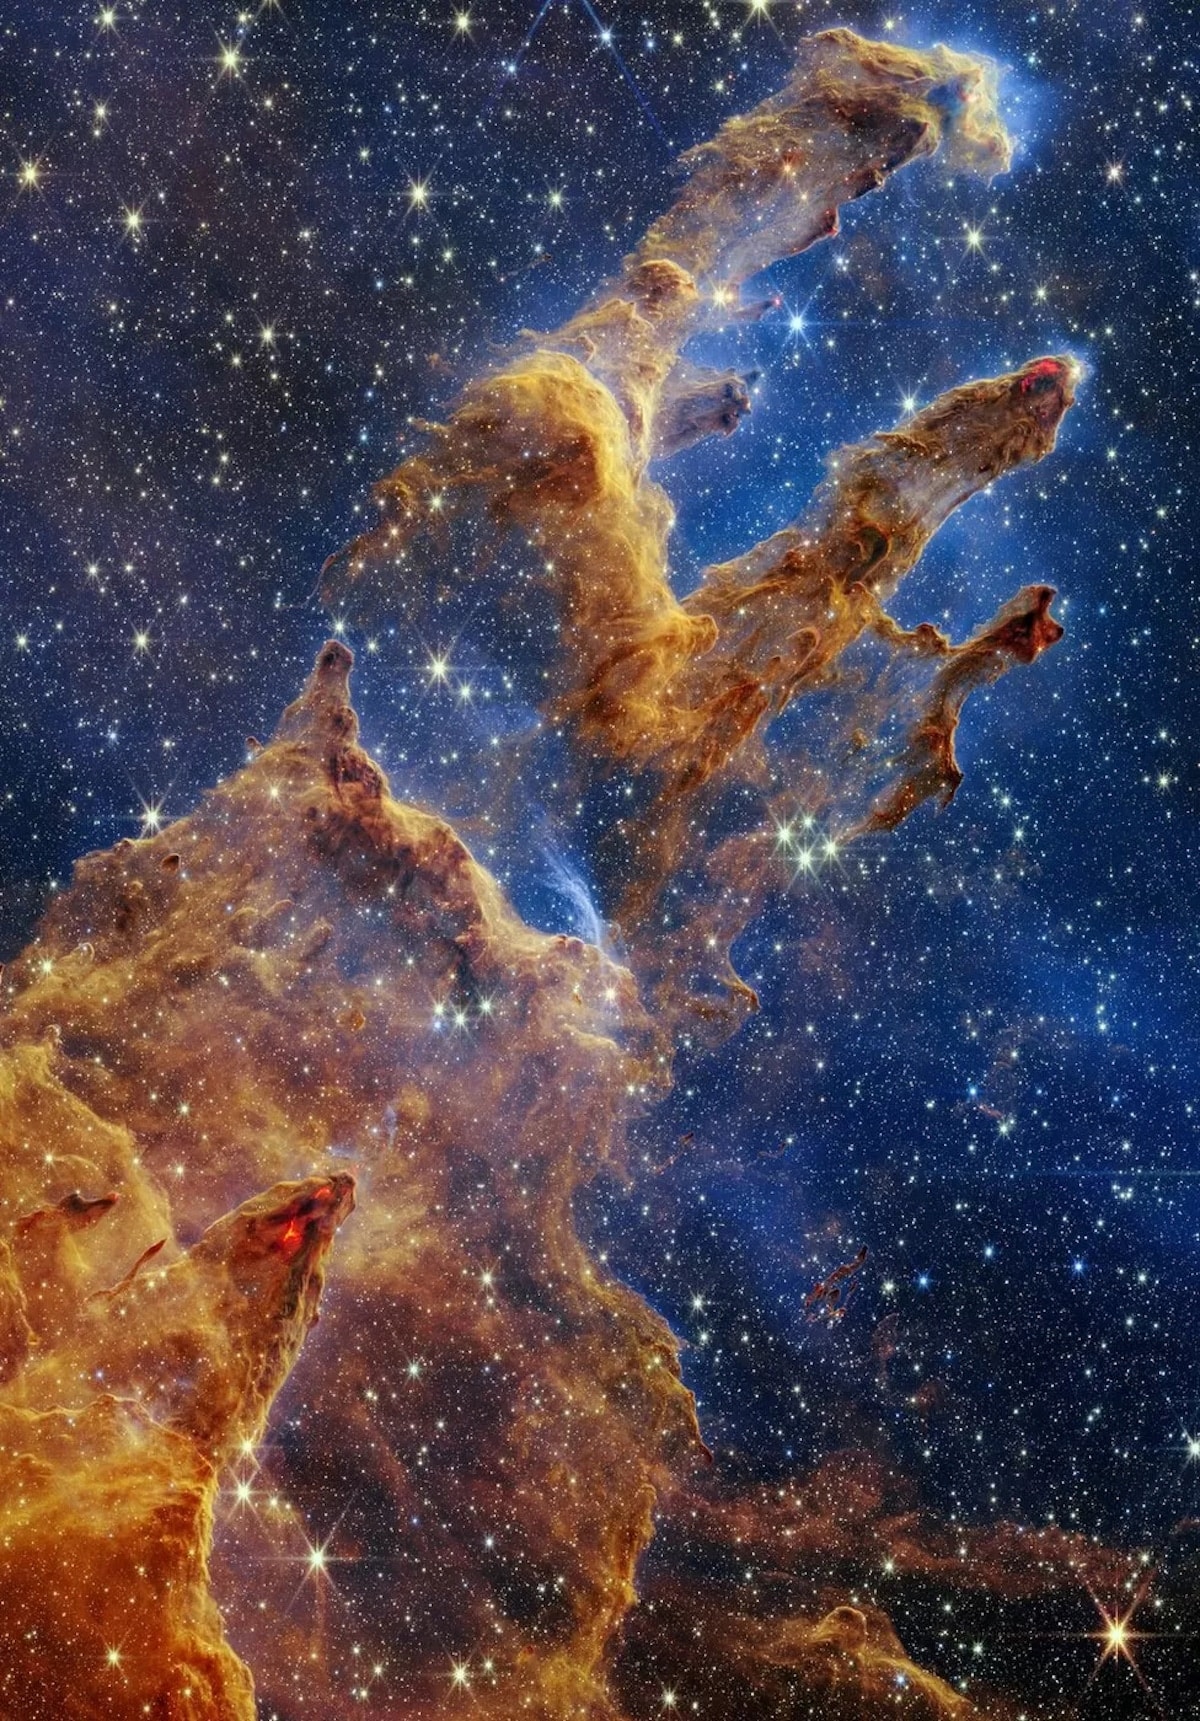 Pillars of Creation by the James Webb Space Telescope